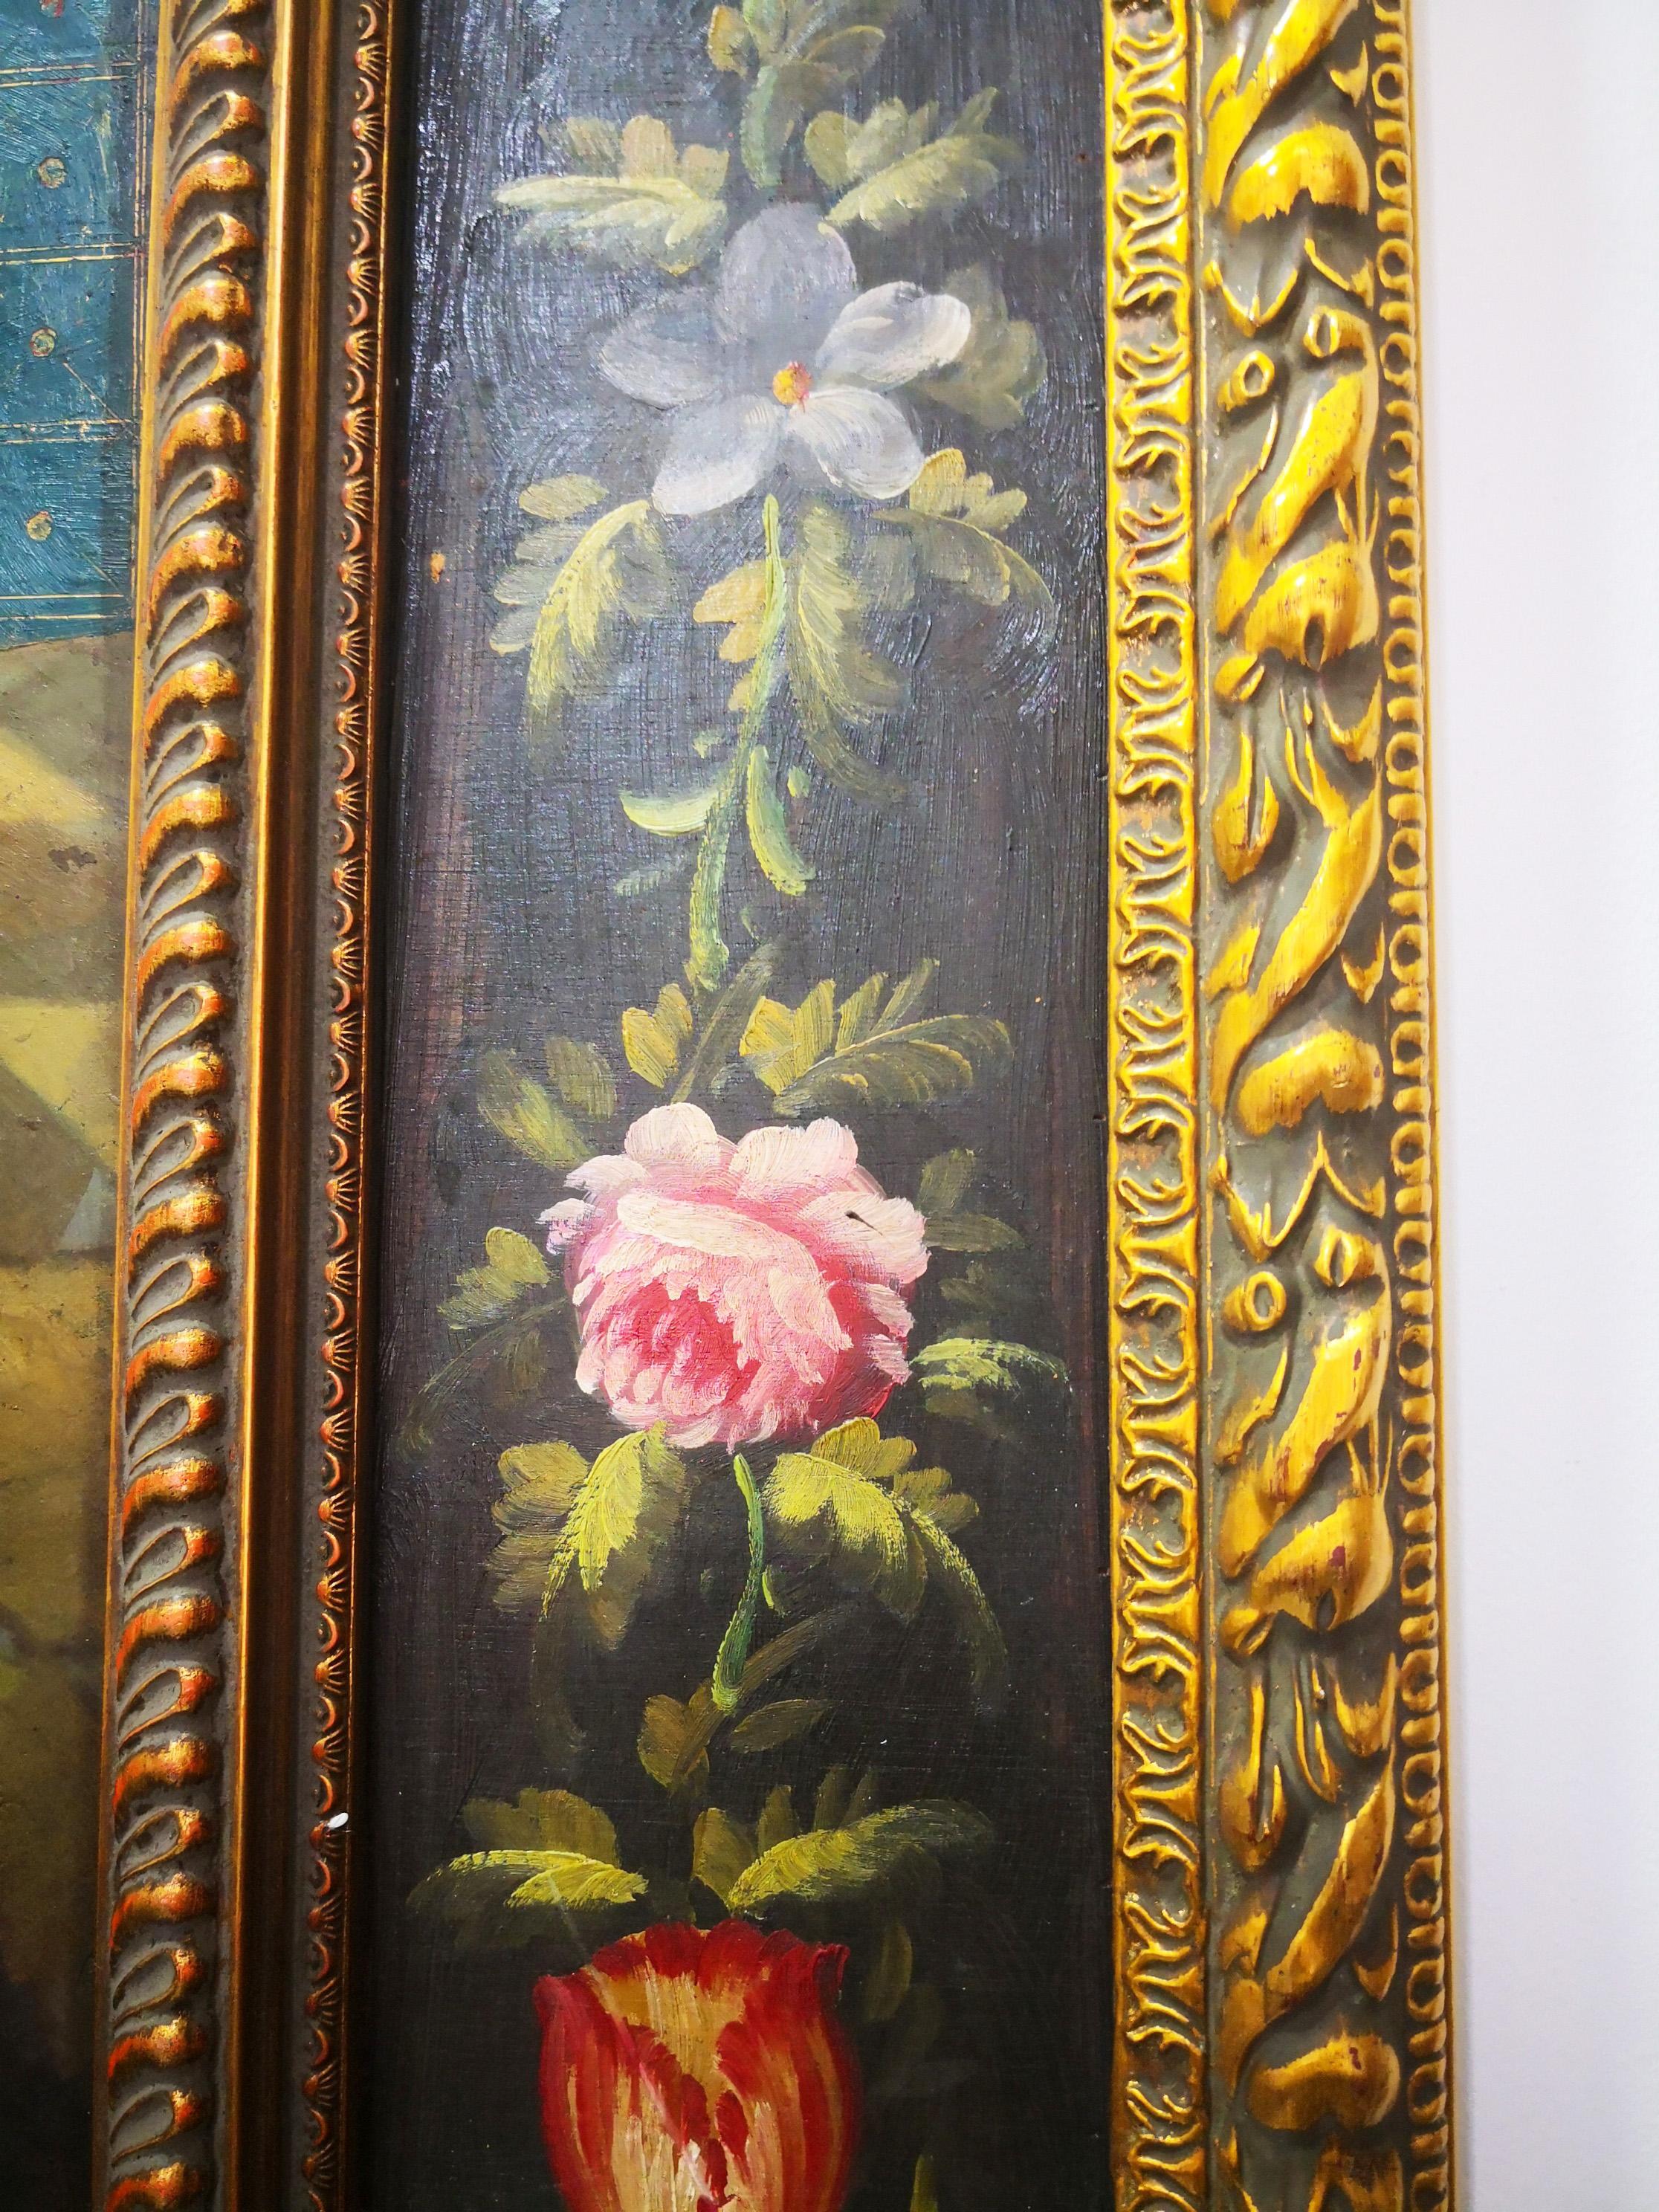 1990s Spanish Hand-Painted Oil on Wood Reproduction in the Gothic Style For Sale 3